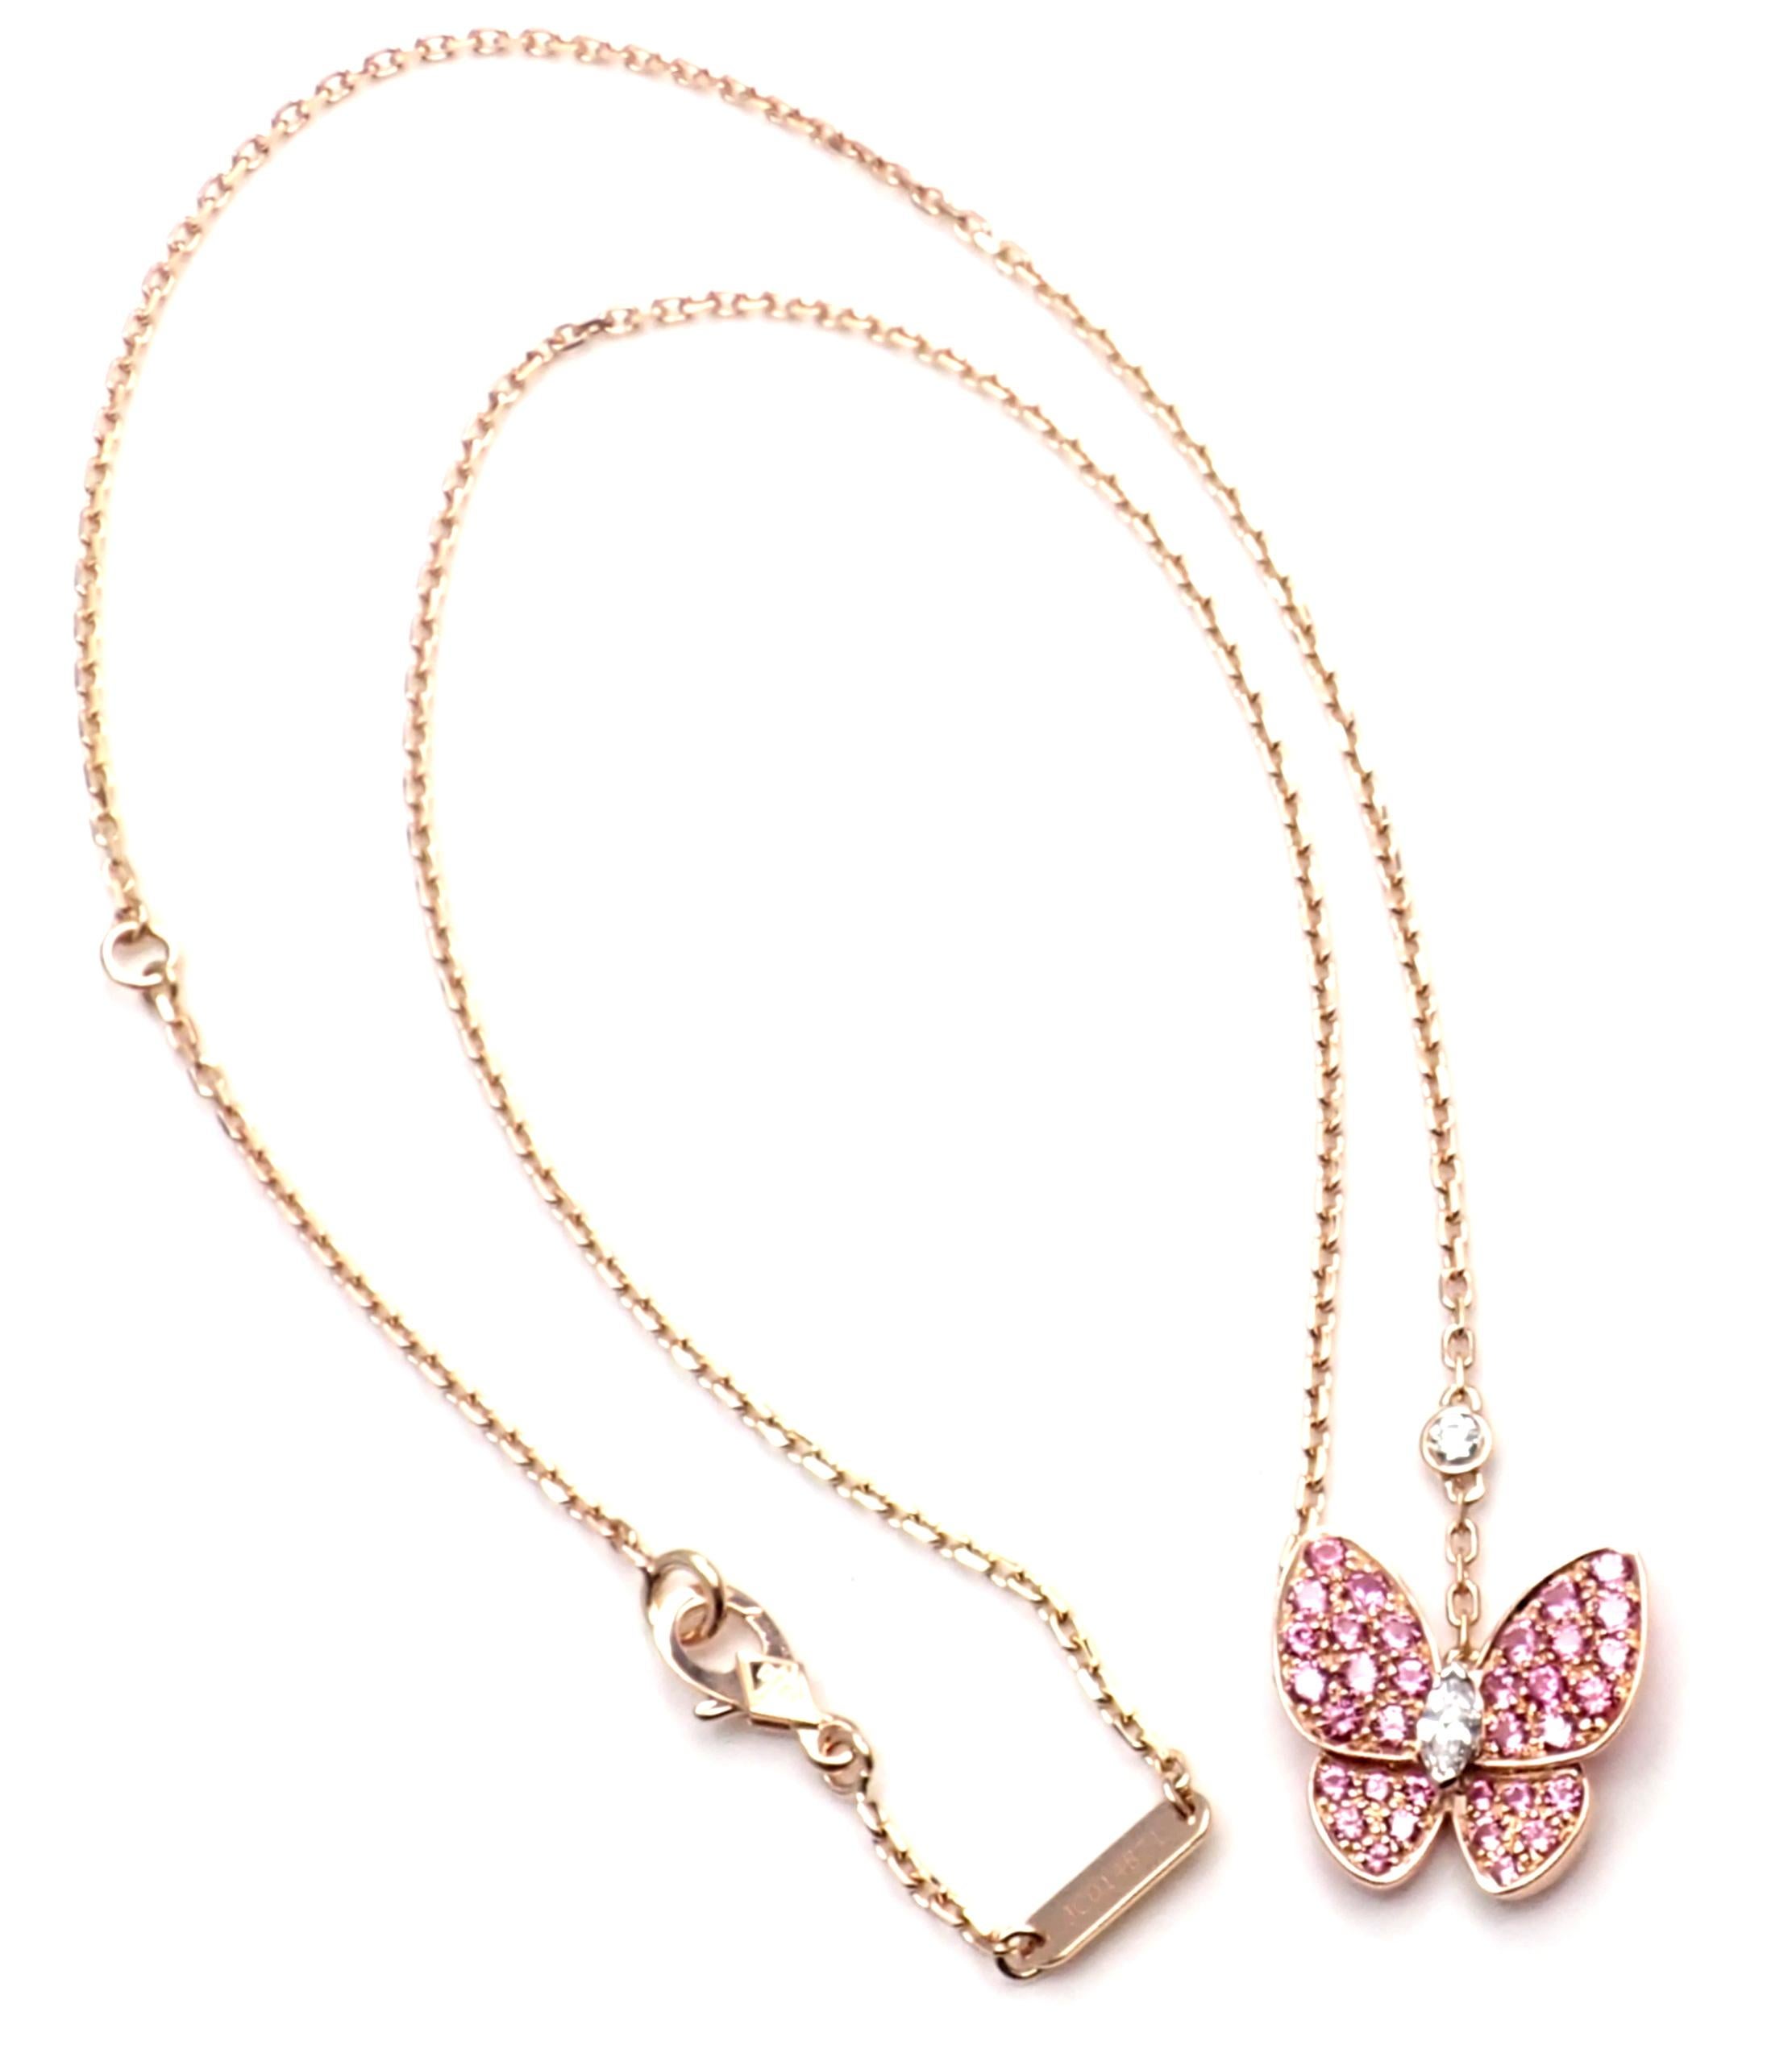 18k Rose Gold Diamond Pink Sapphire Two Butterfly Pendant Necklace by Van Cleef & Arpels. 
With 2 Brilliant Cut Diamonds VVS1 clarity, E color
34 pink sapphires total weight approx.  0.88 carats
This necklace comes with VCA service paper from VCA